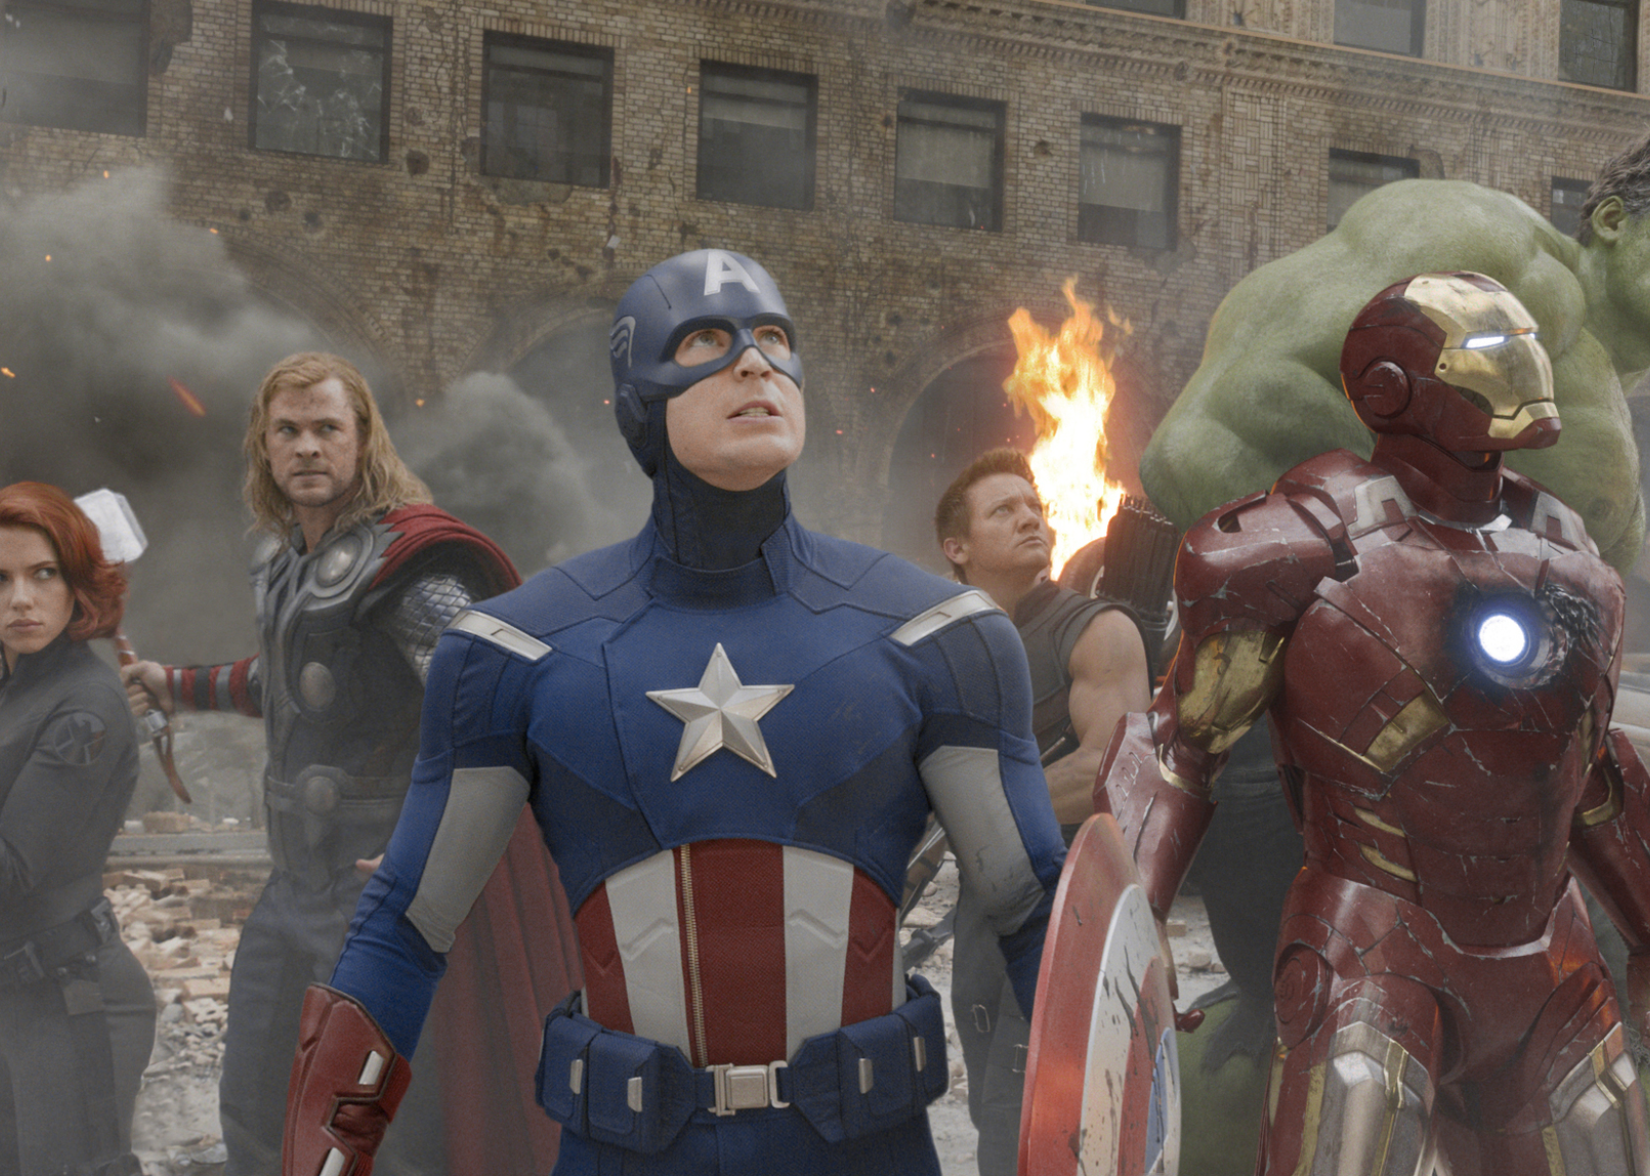 A scene with the full Avengers crew in action from "The Avengers" movie